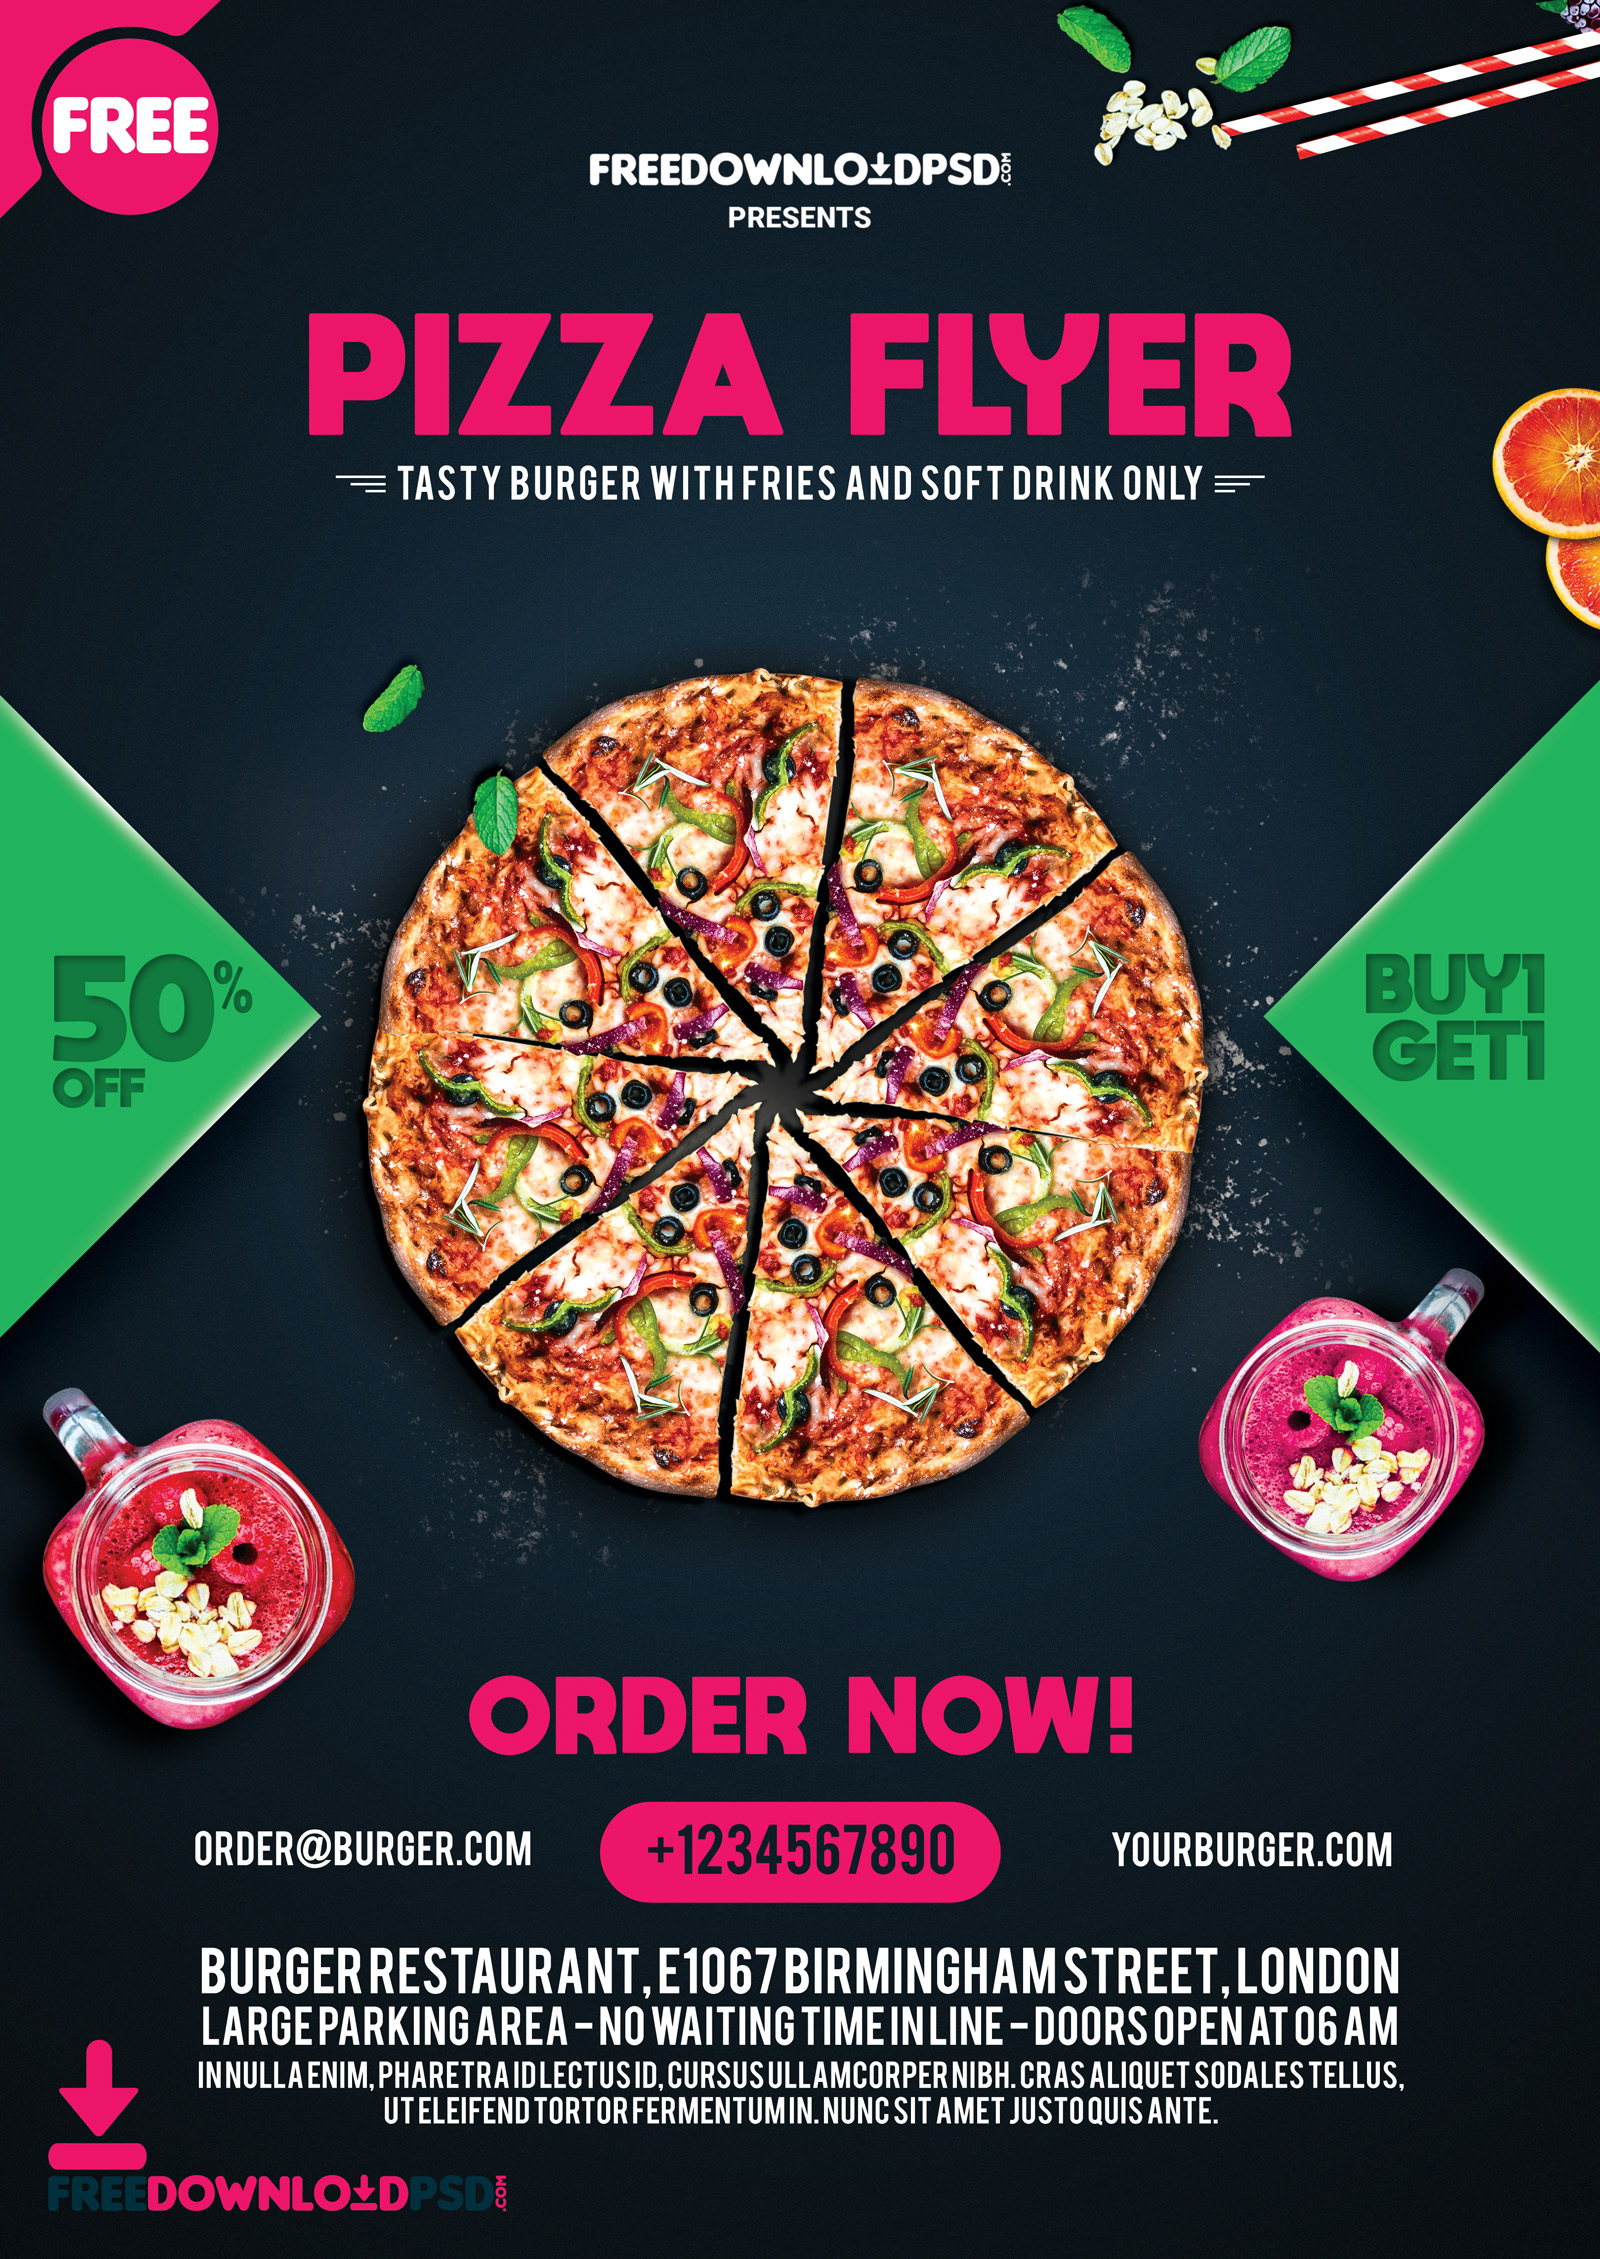 Pizza Flyer Free Template Freedownloadpsd Com - vrogue.co